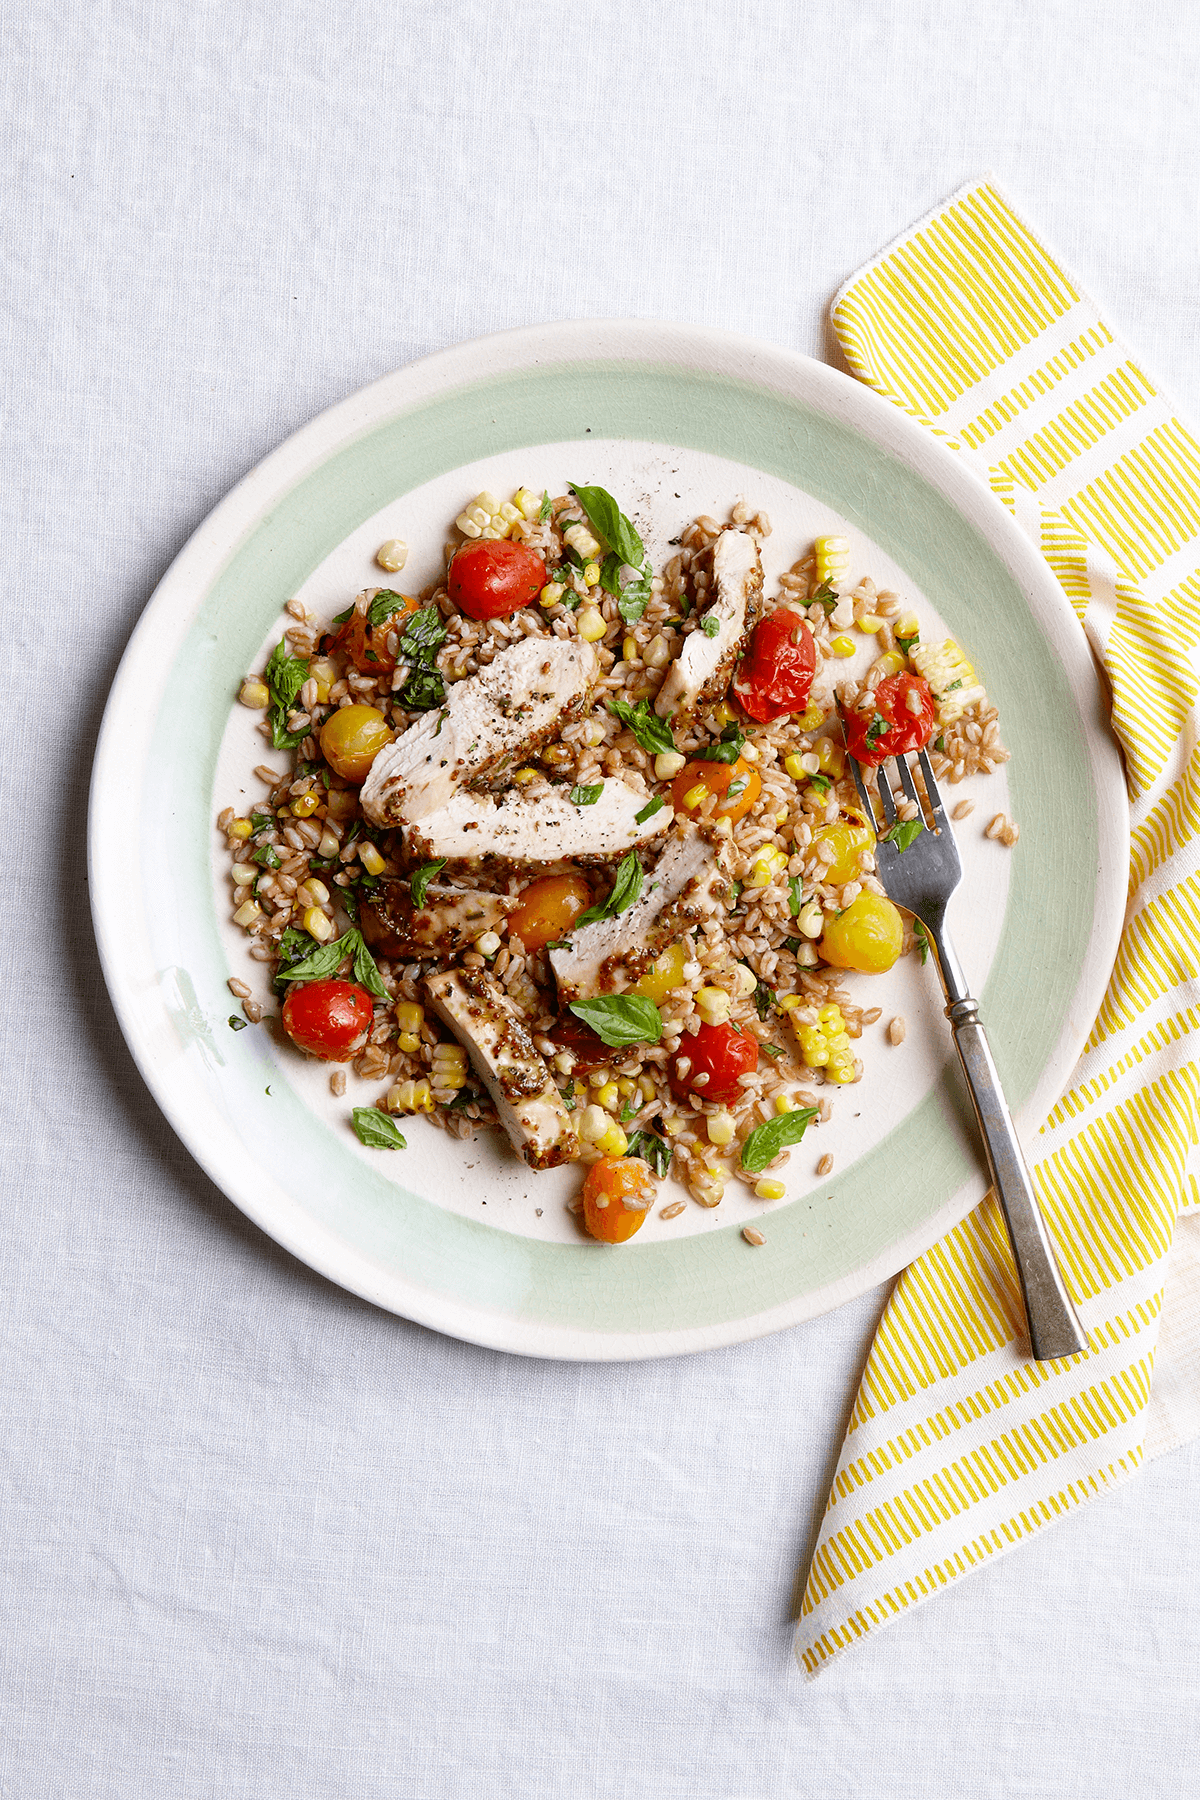 Summery Farro and Grilled Chicken Salad